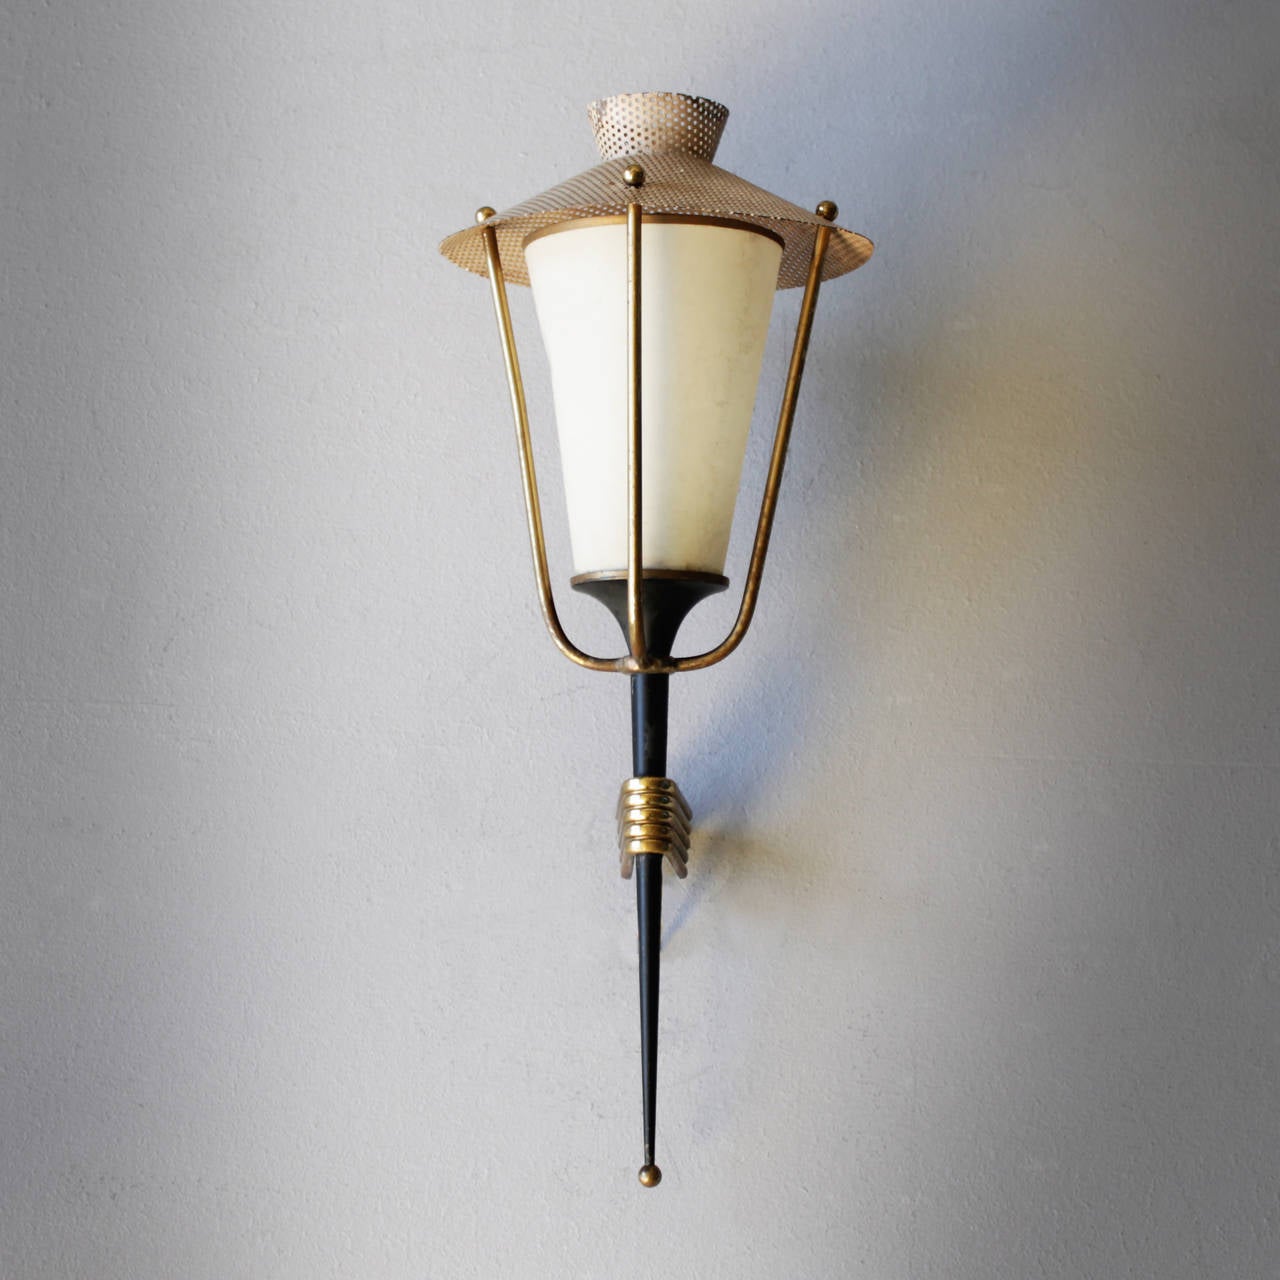 Mid-20th Century Pair of Corner Mounted Sconces by Maison Arlus